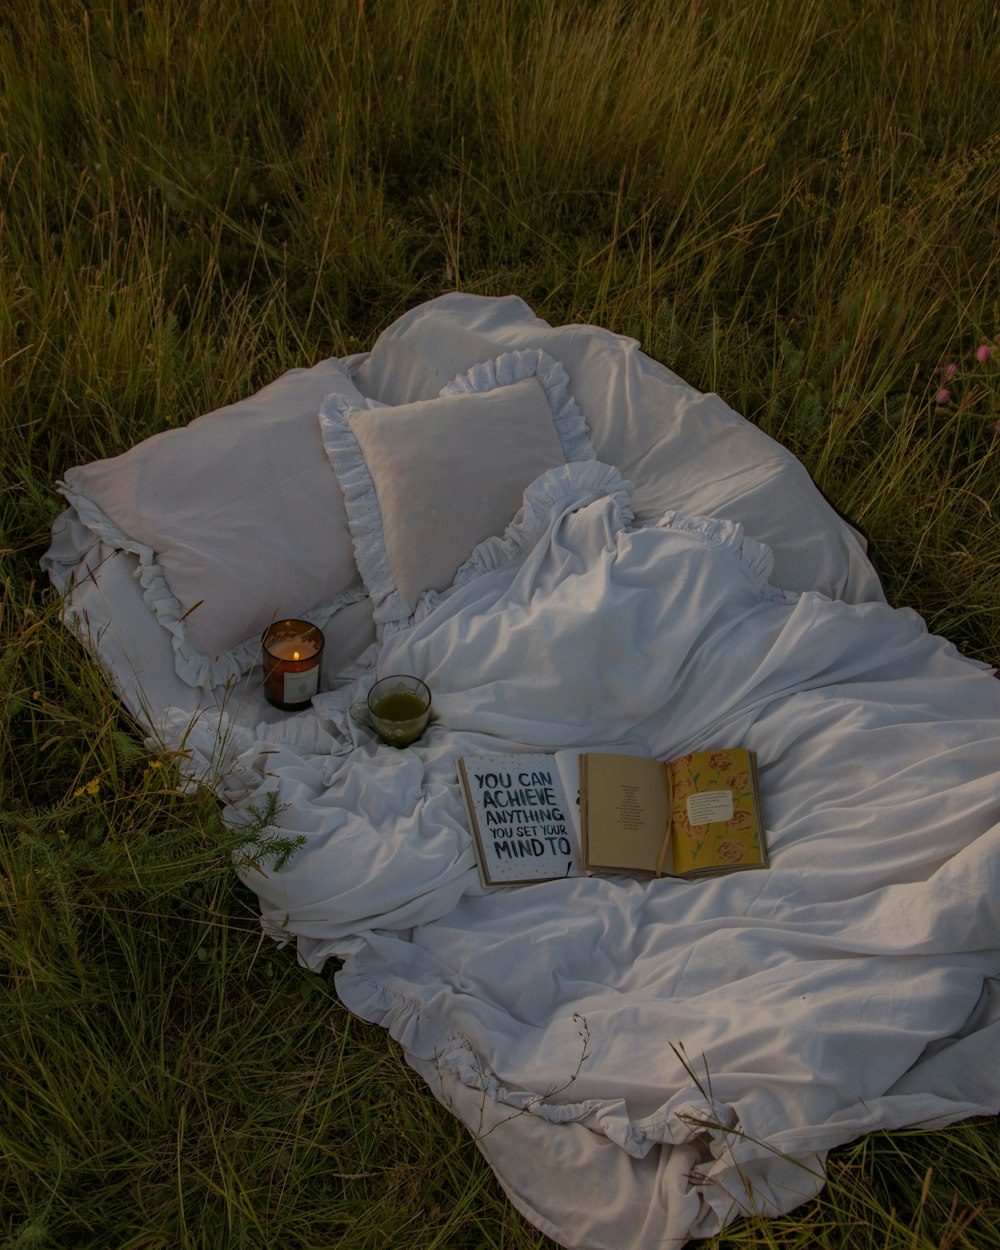 a book and some candles on a blanket in the grass